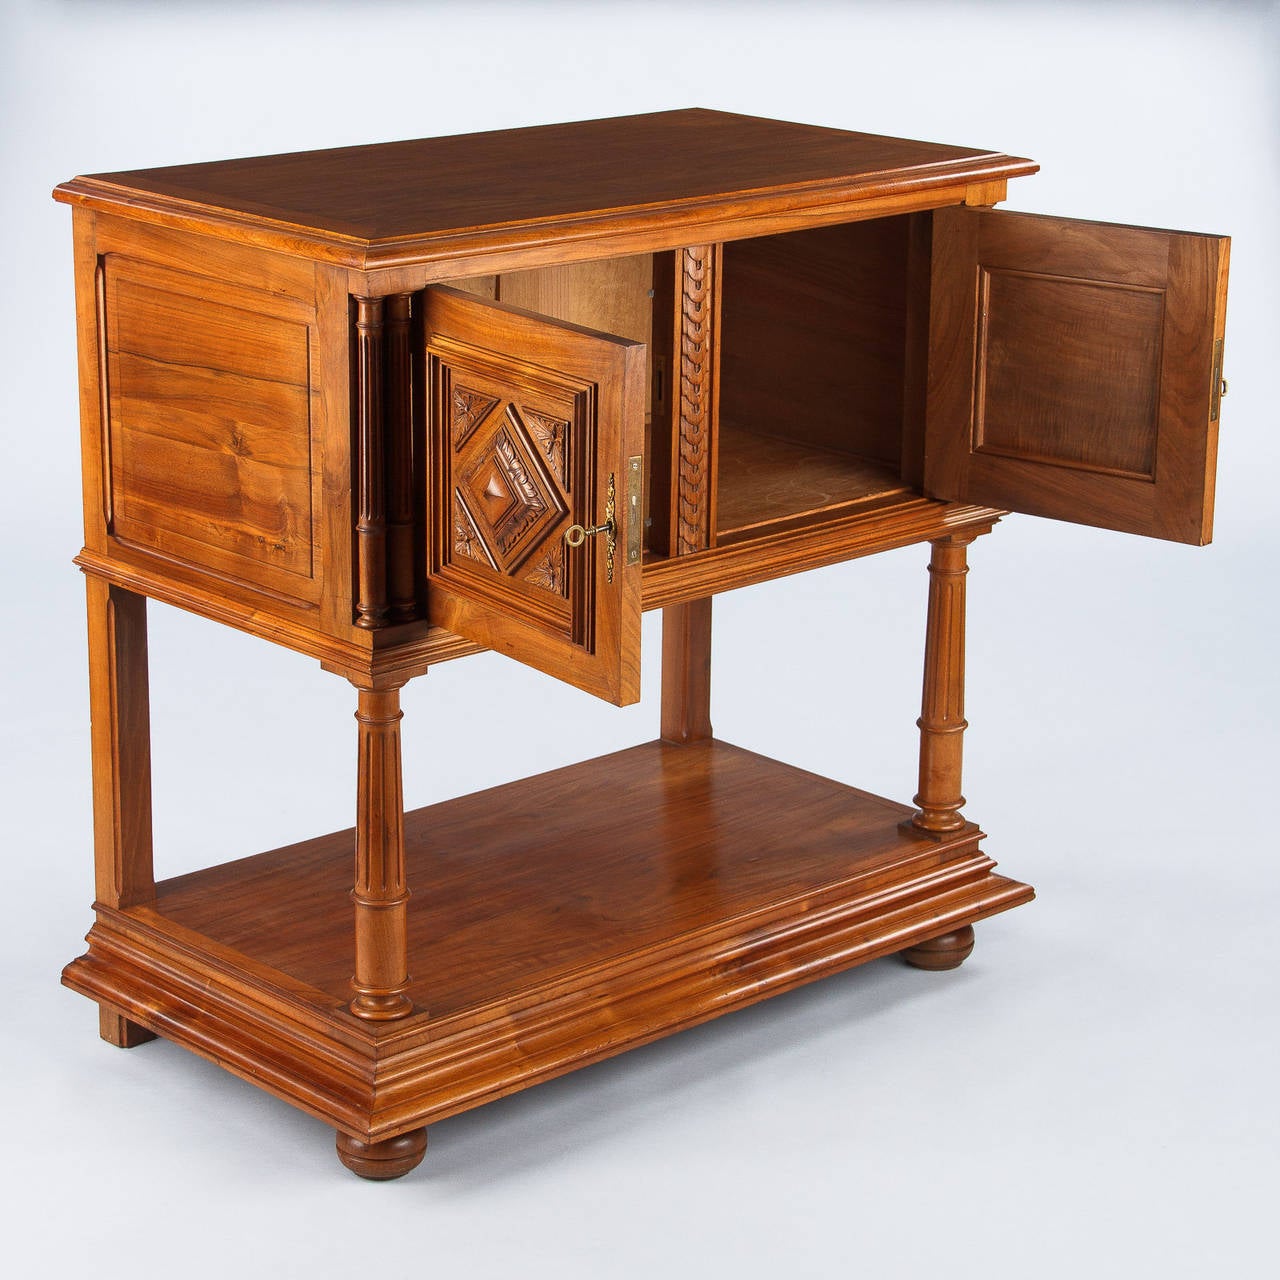 Renaissance Revival Renaissance Style Walnut Sideboard Cabinet from France, circa 1900s